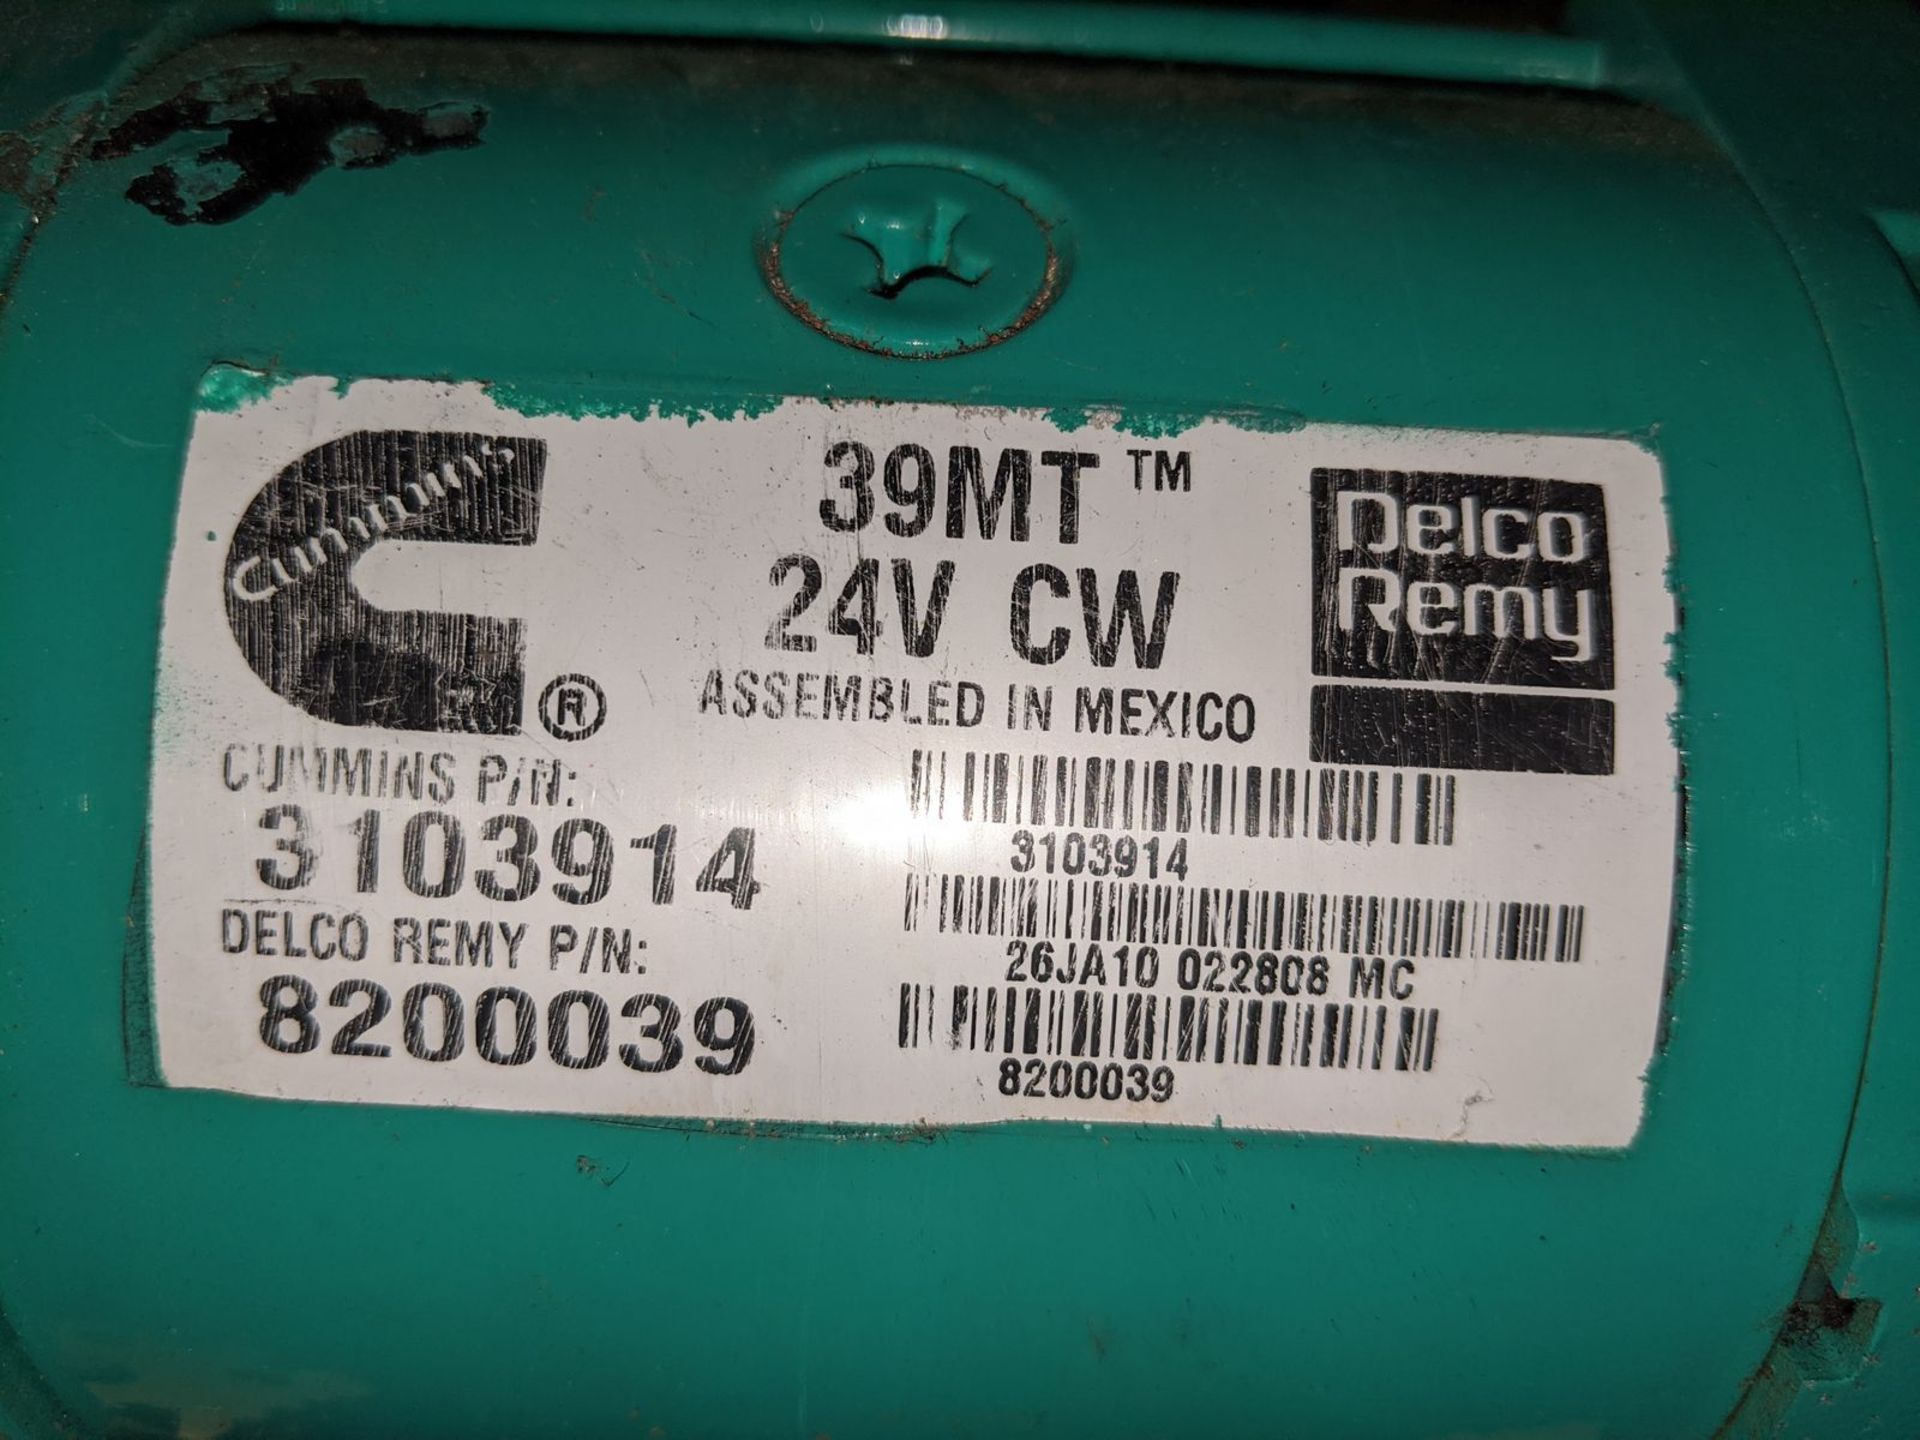 Delco Remy Model 39MT 24V Gear Reduction Starter - Image 2 of 2